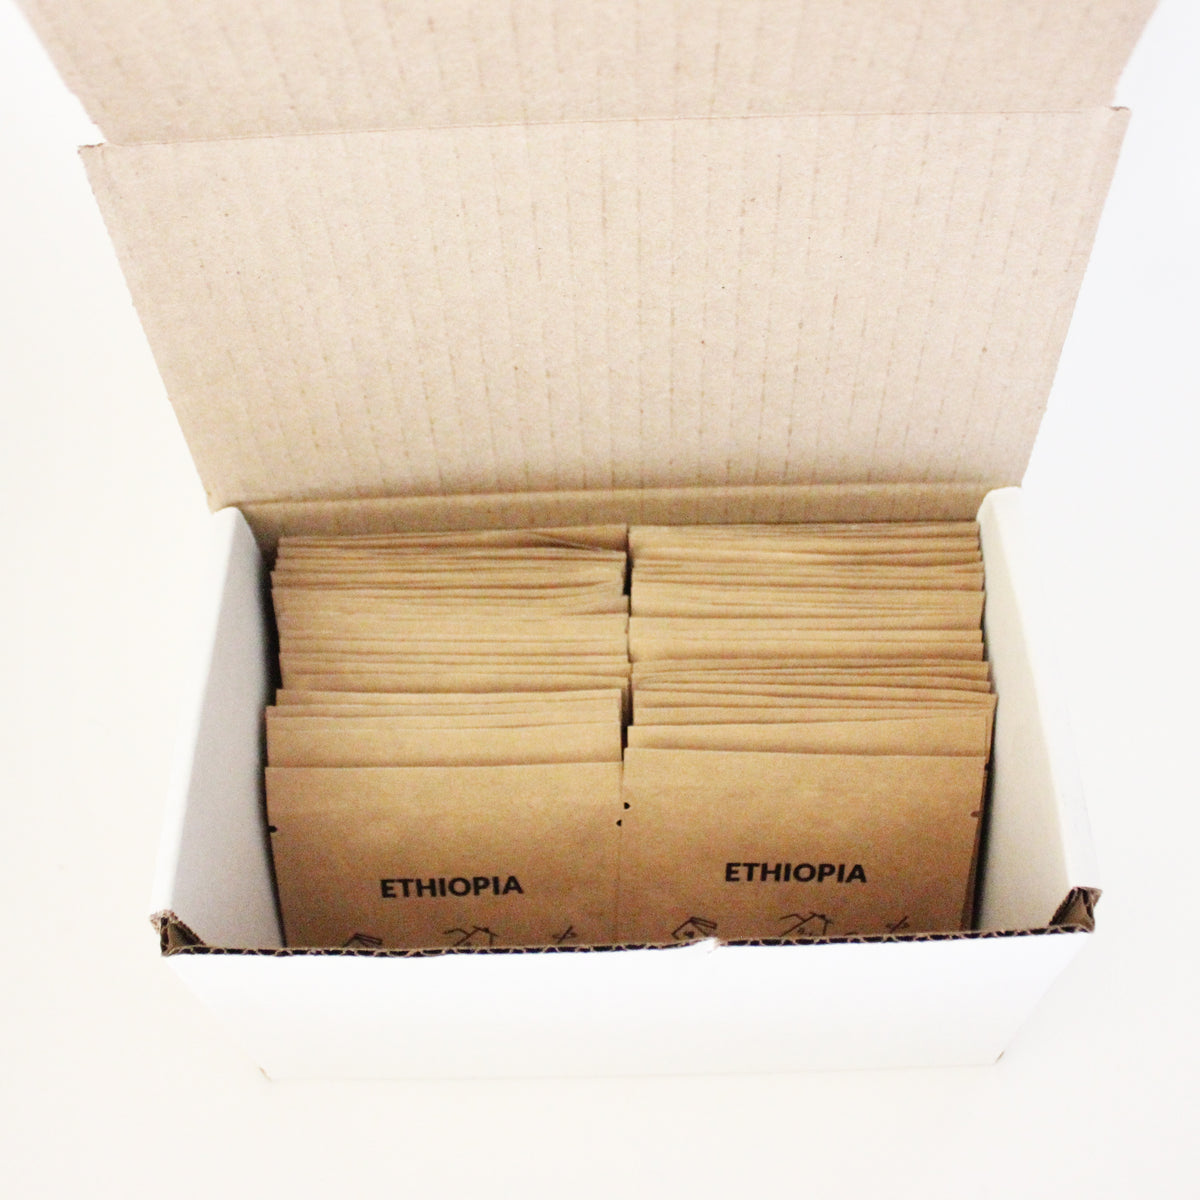 Open cardboard box filled with several smaller packets labeled "Tandem World Voyageur", indicating the possible contents as instant coffee from Ethiopia.